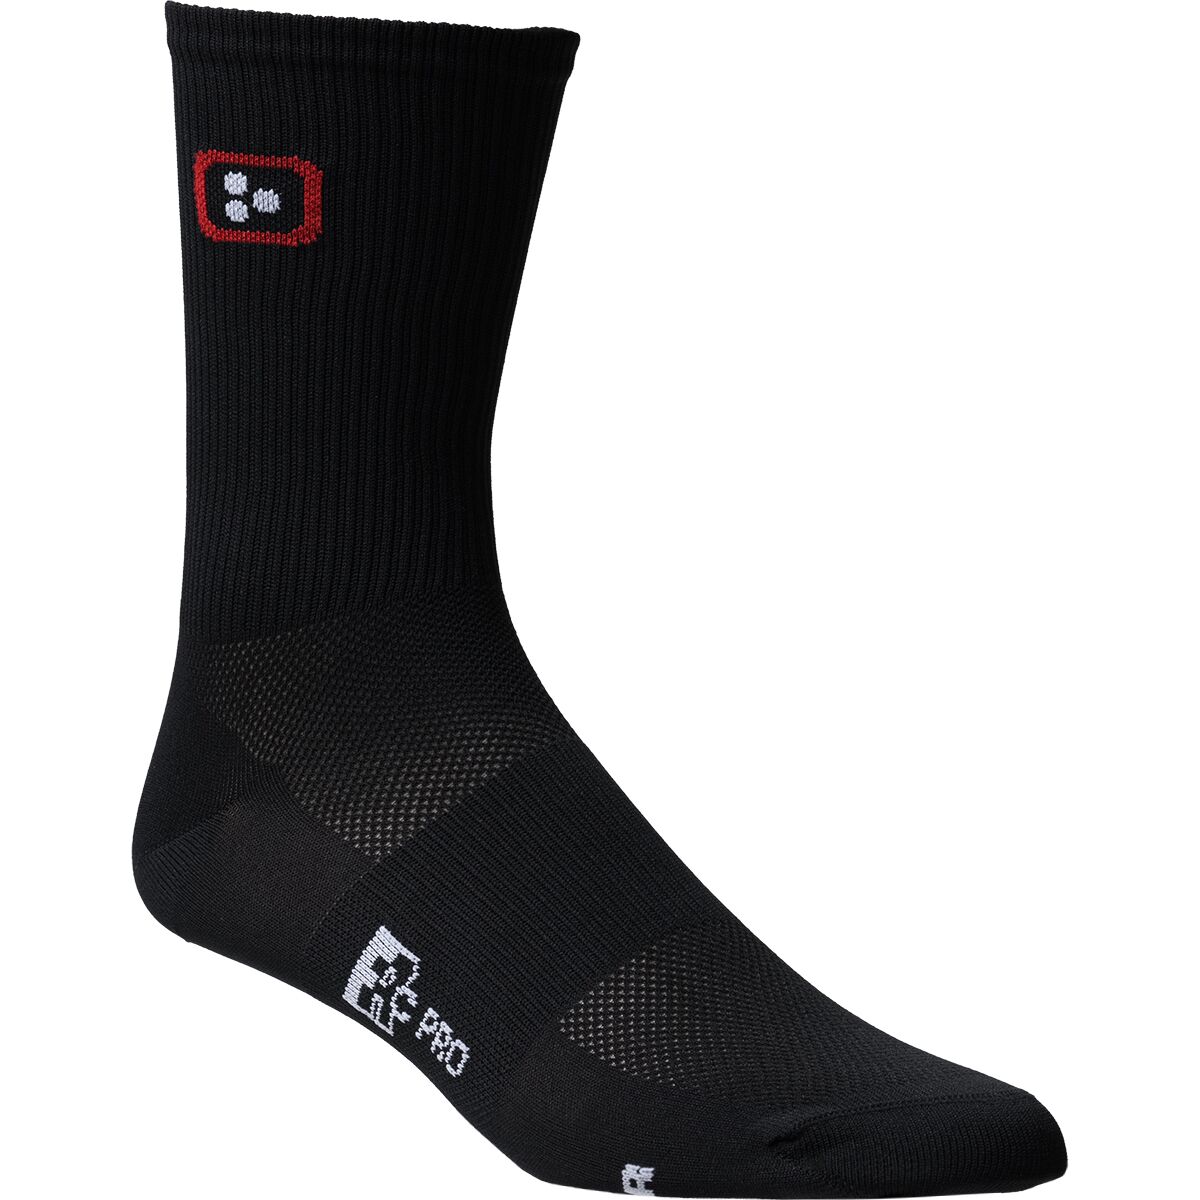 Competitive Cyclist Race Day Sock - Men's